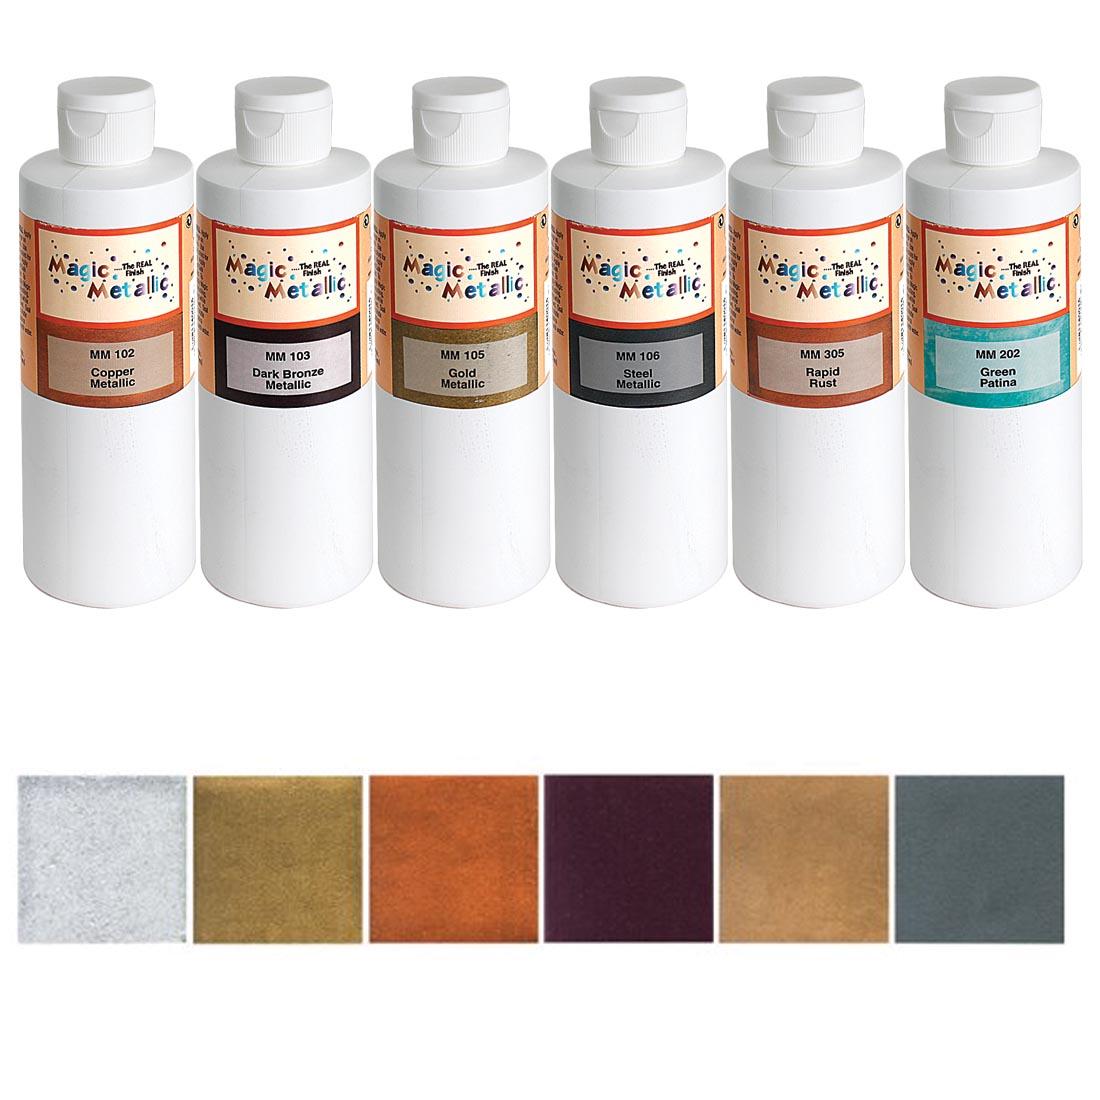 Six Bottles from the Magic Metallic Paint and Patina Set along with sample tiles of each color